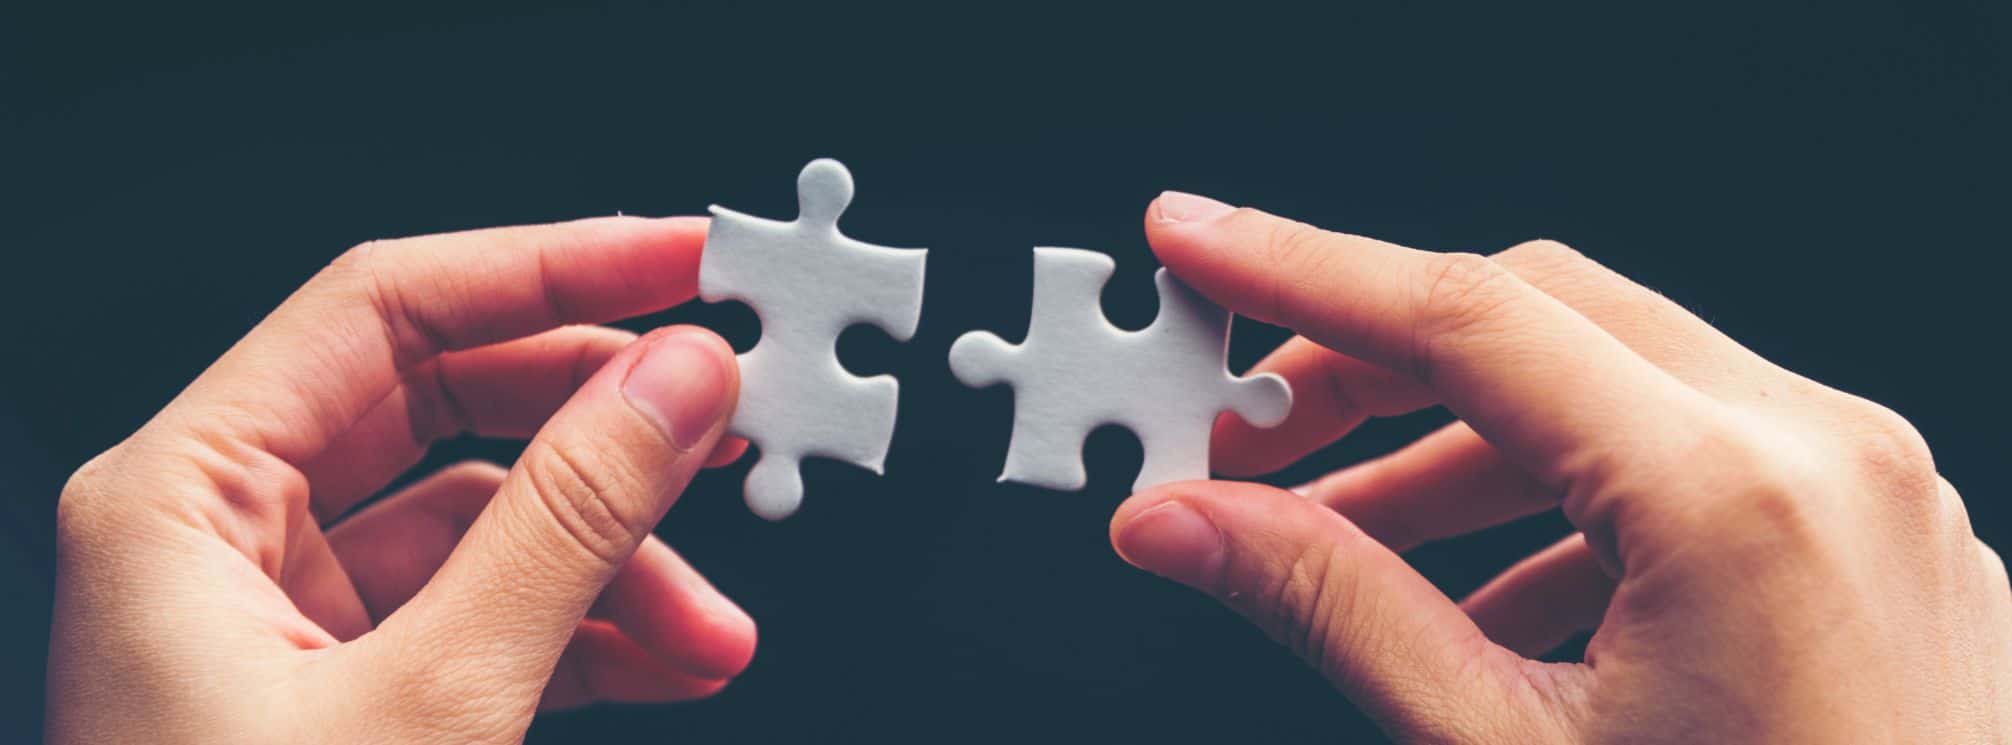 image of hands putting two puzzle pieces together to represent finding the right workforce solutions